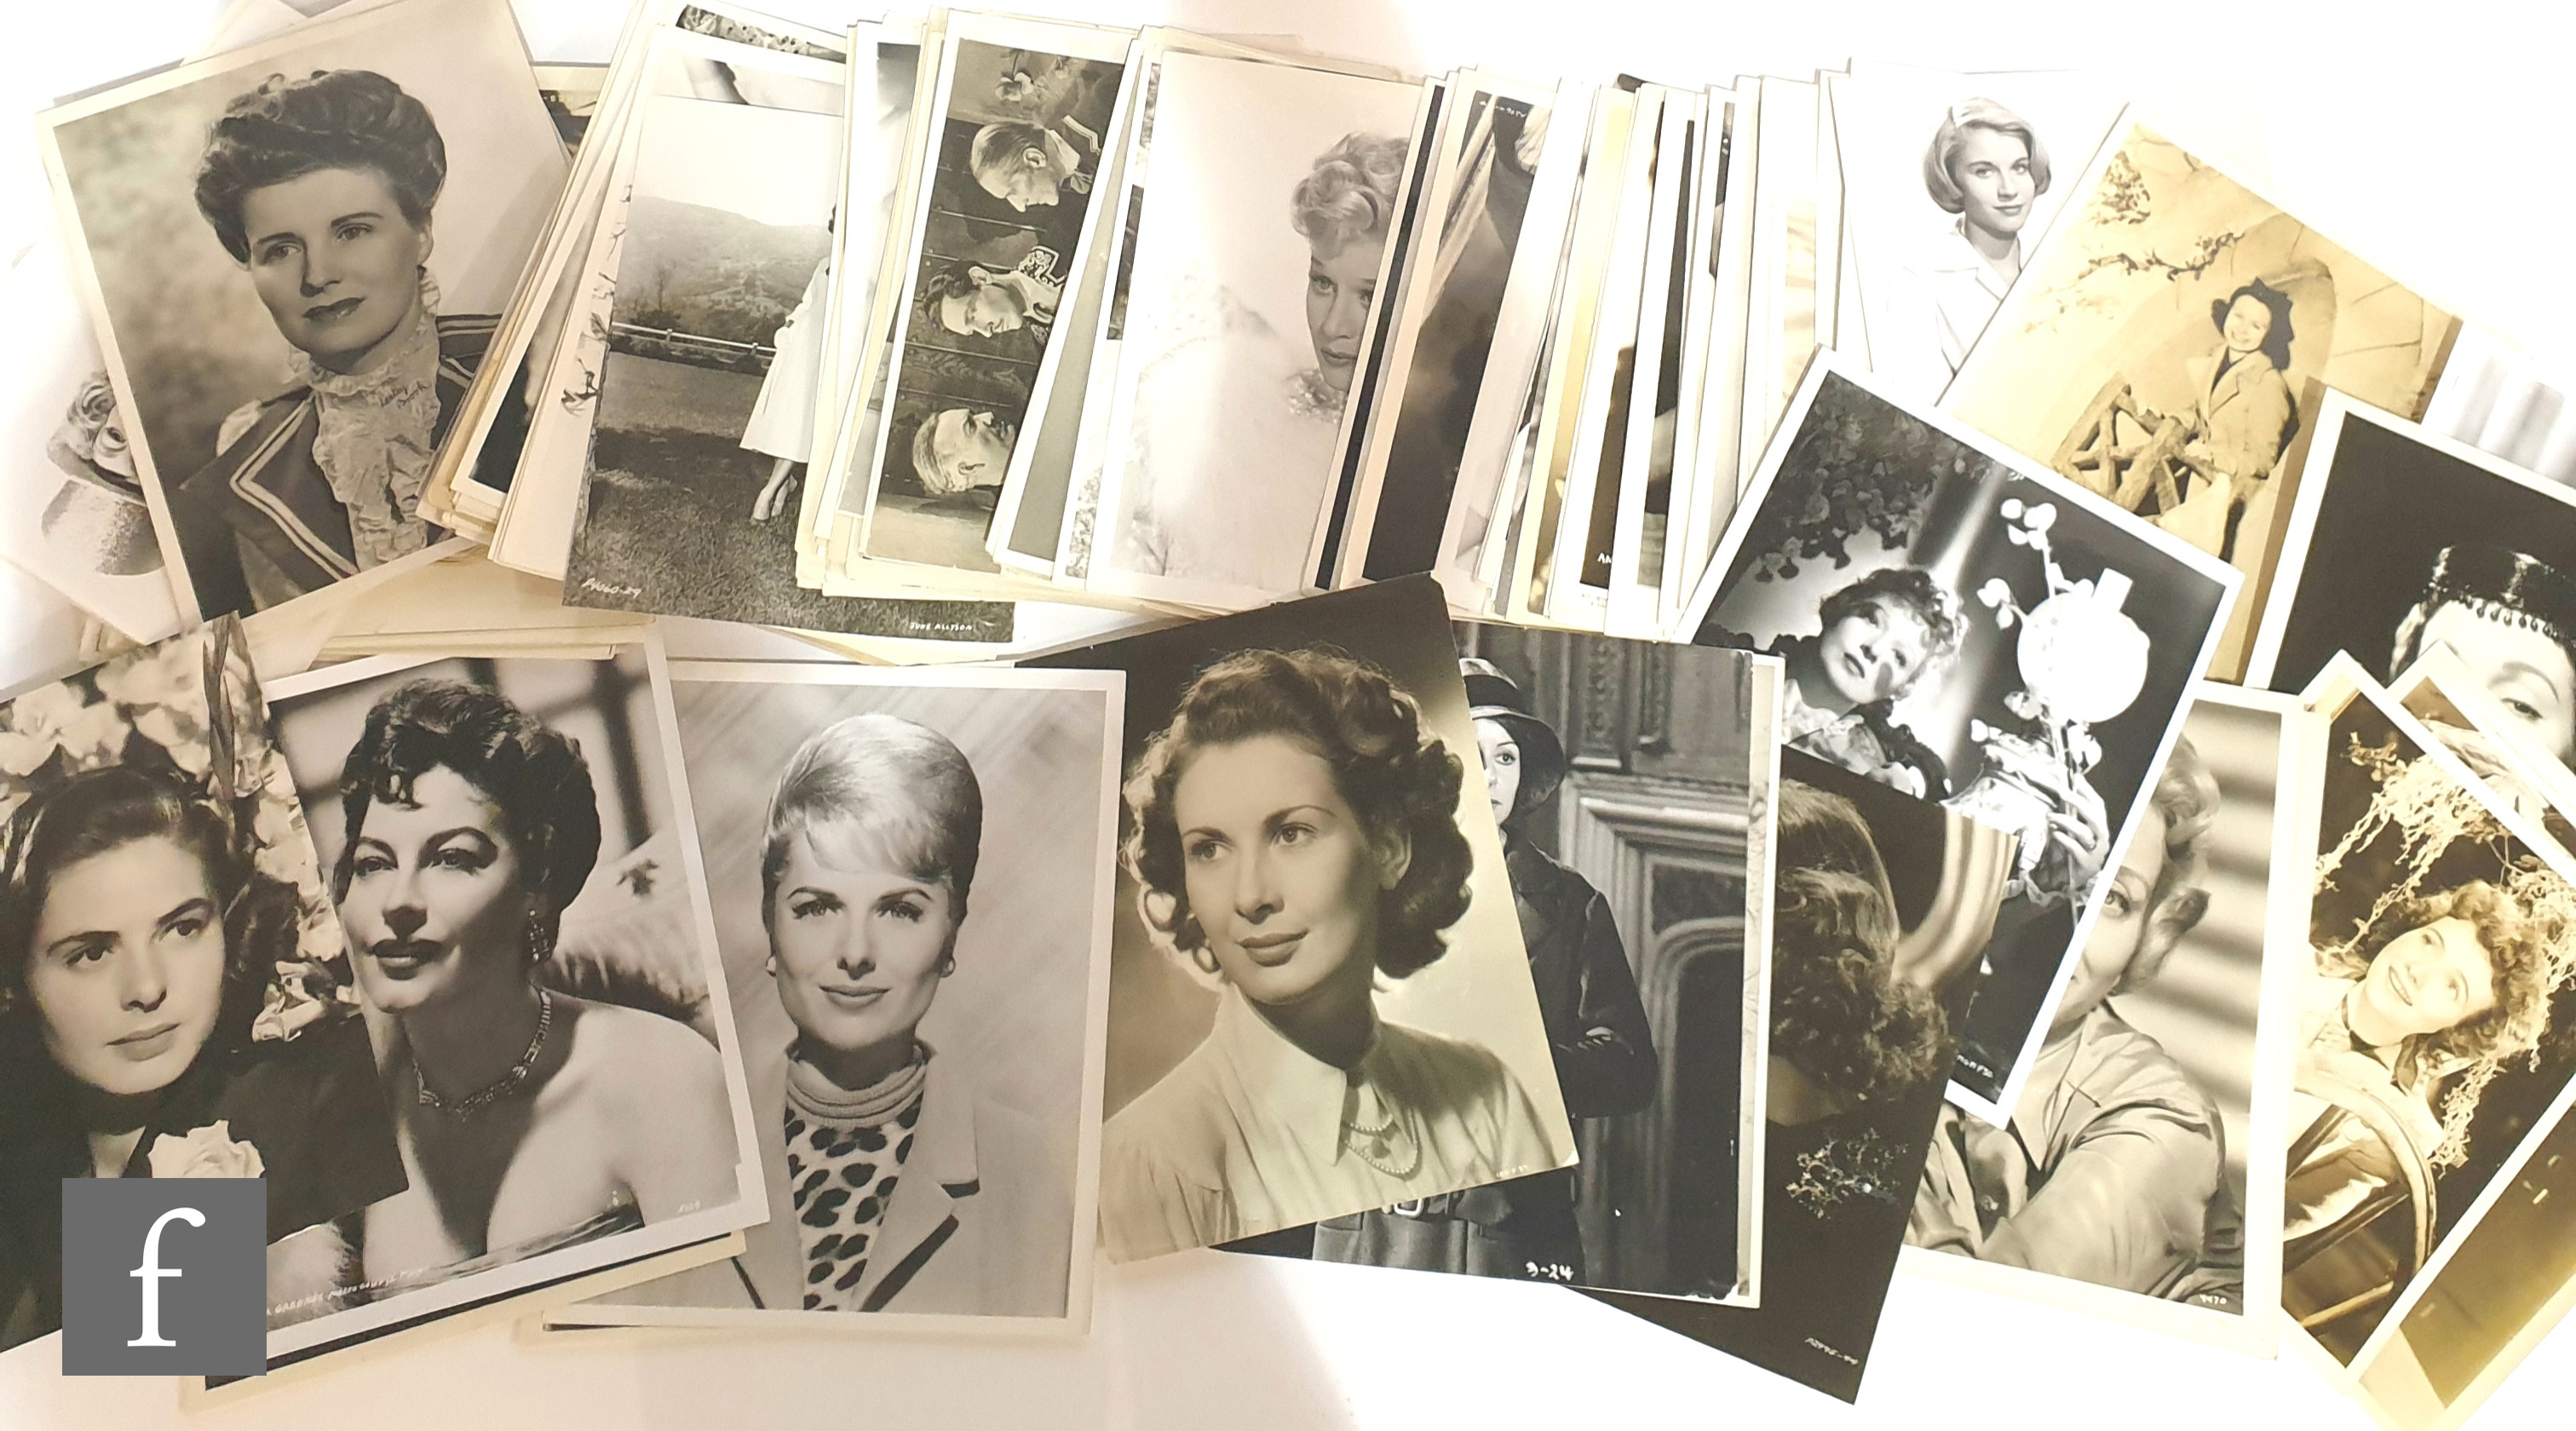 A large collection of 8x10 vintage portraits of mostly female stars including Vivien Leigh, Joan